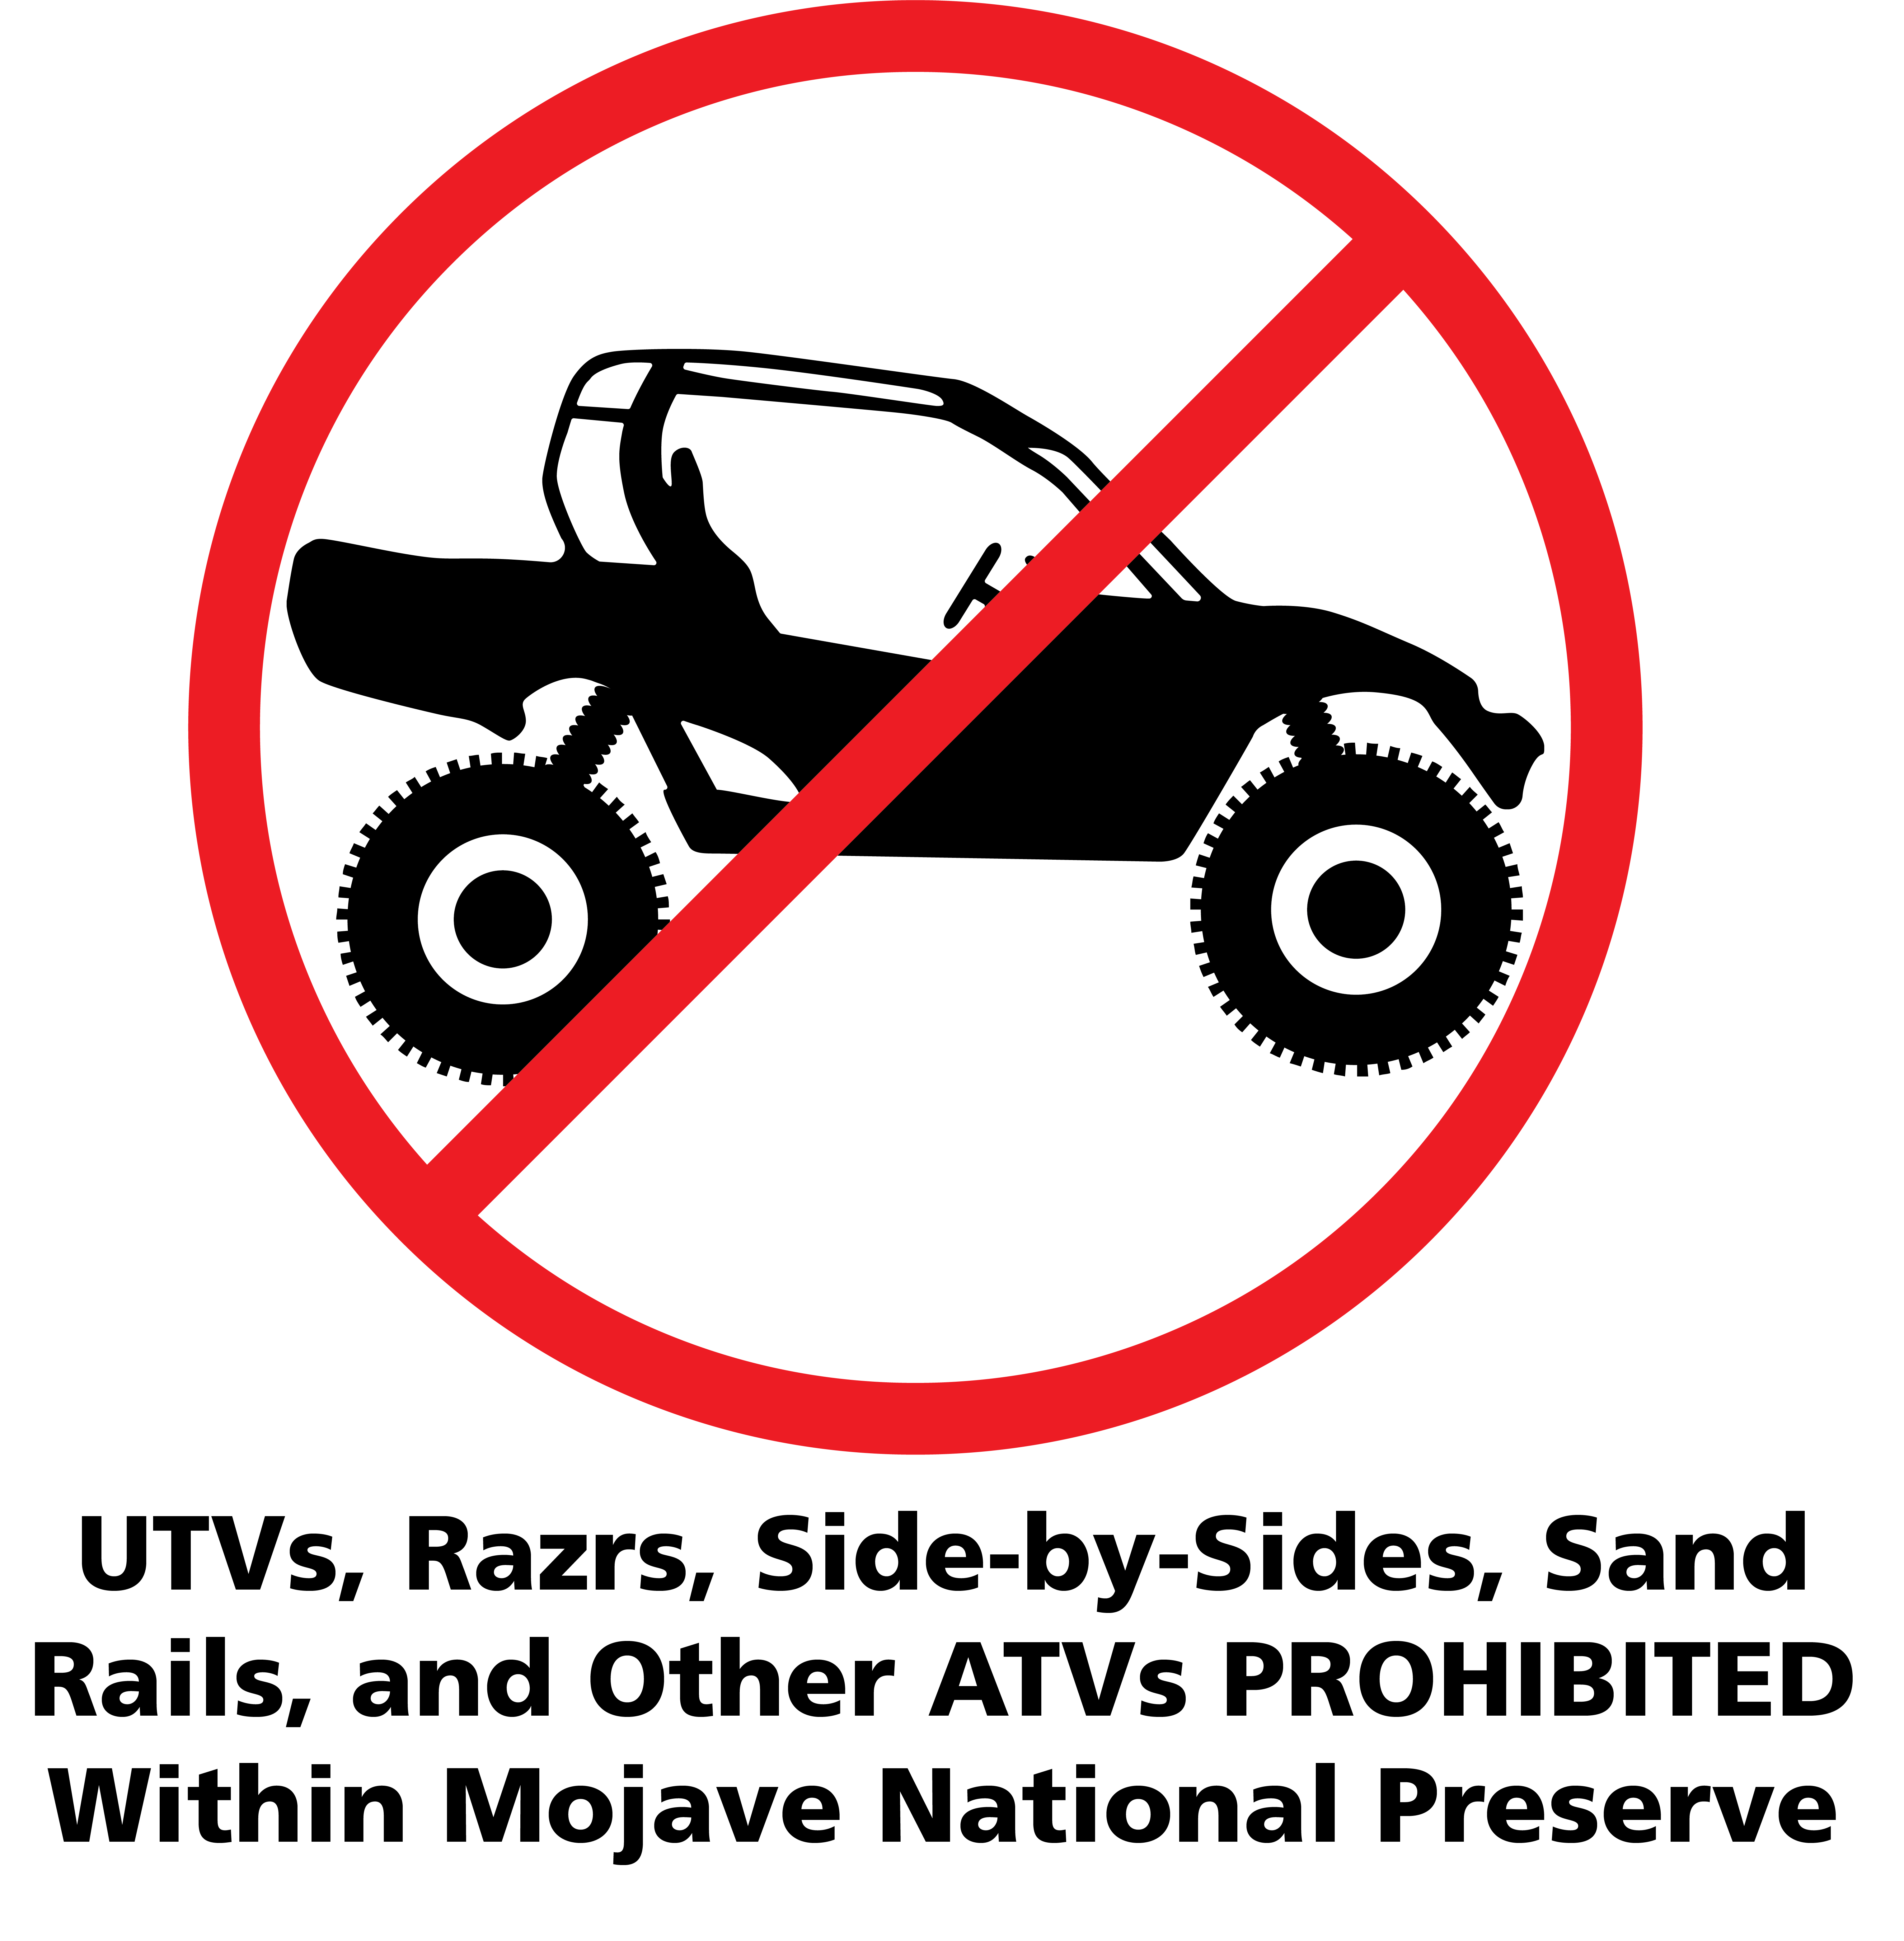 An outline of a UTV off road vehicle with a red circle and crossed Line